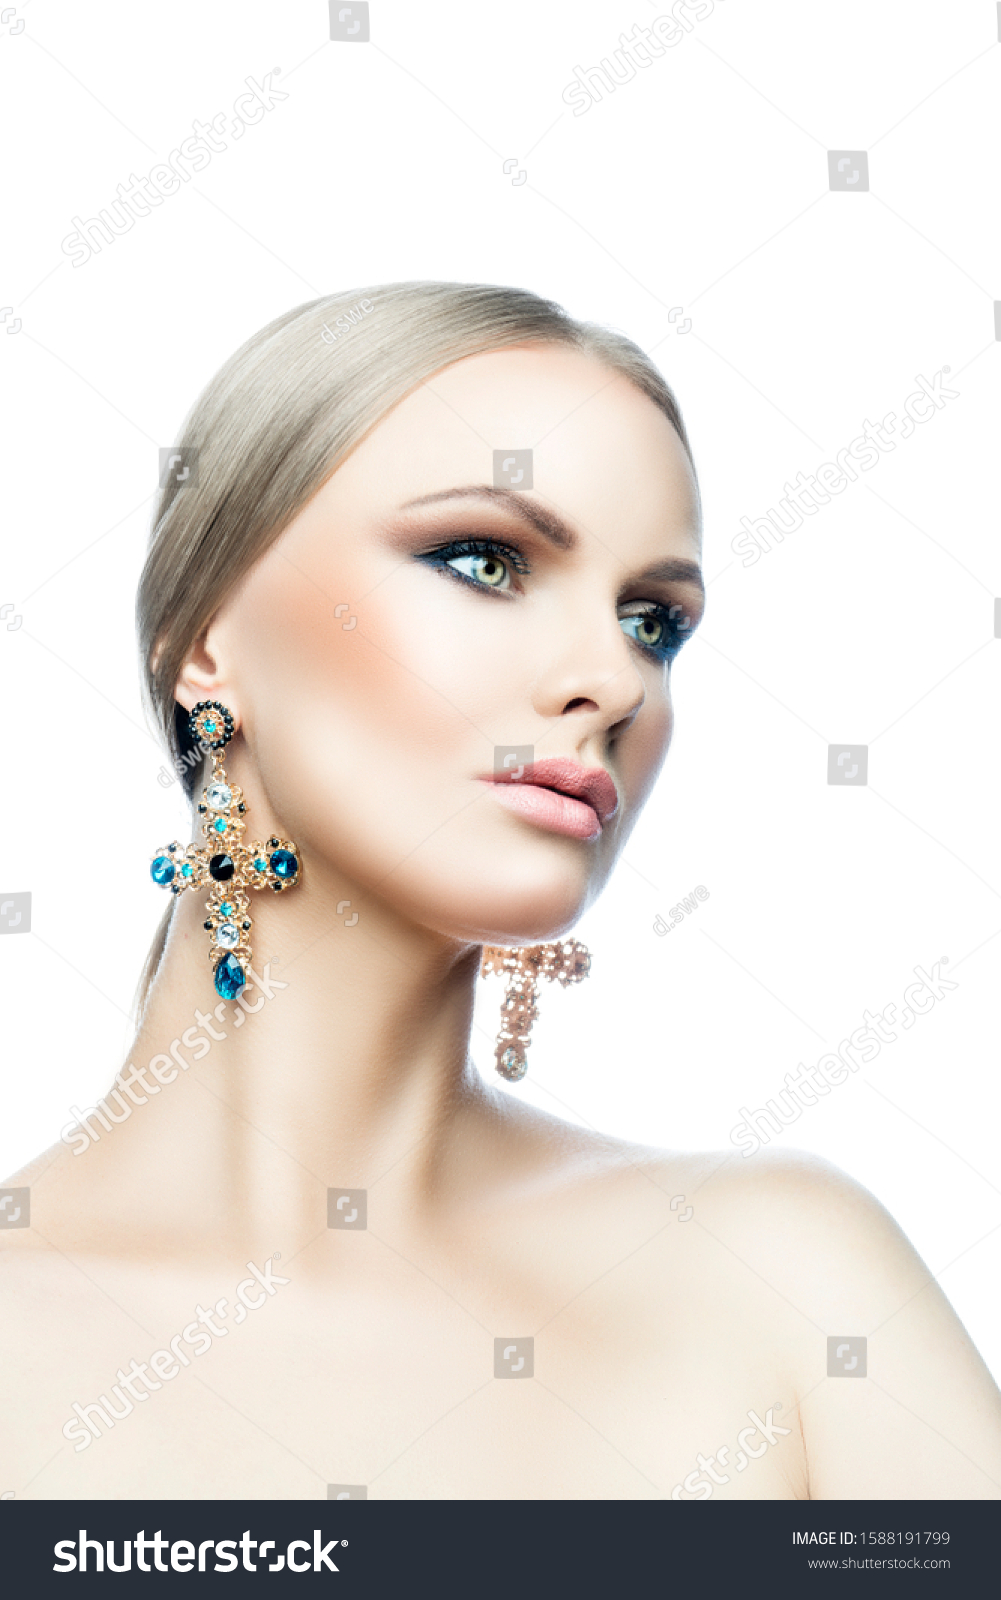 Beautiful fashion model woman studio beauty portrait, perfect skin, bright eye make-up, blonde hair style, big earrings with color stones, naked shoulder body. Isolated. White background. Copy space #1588191799